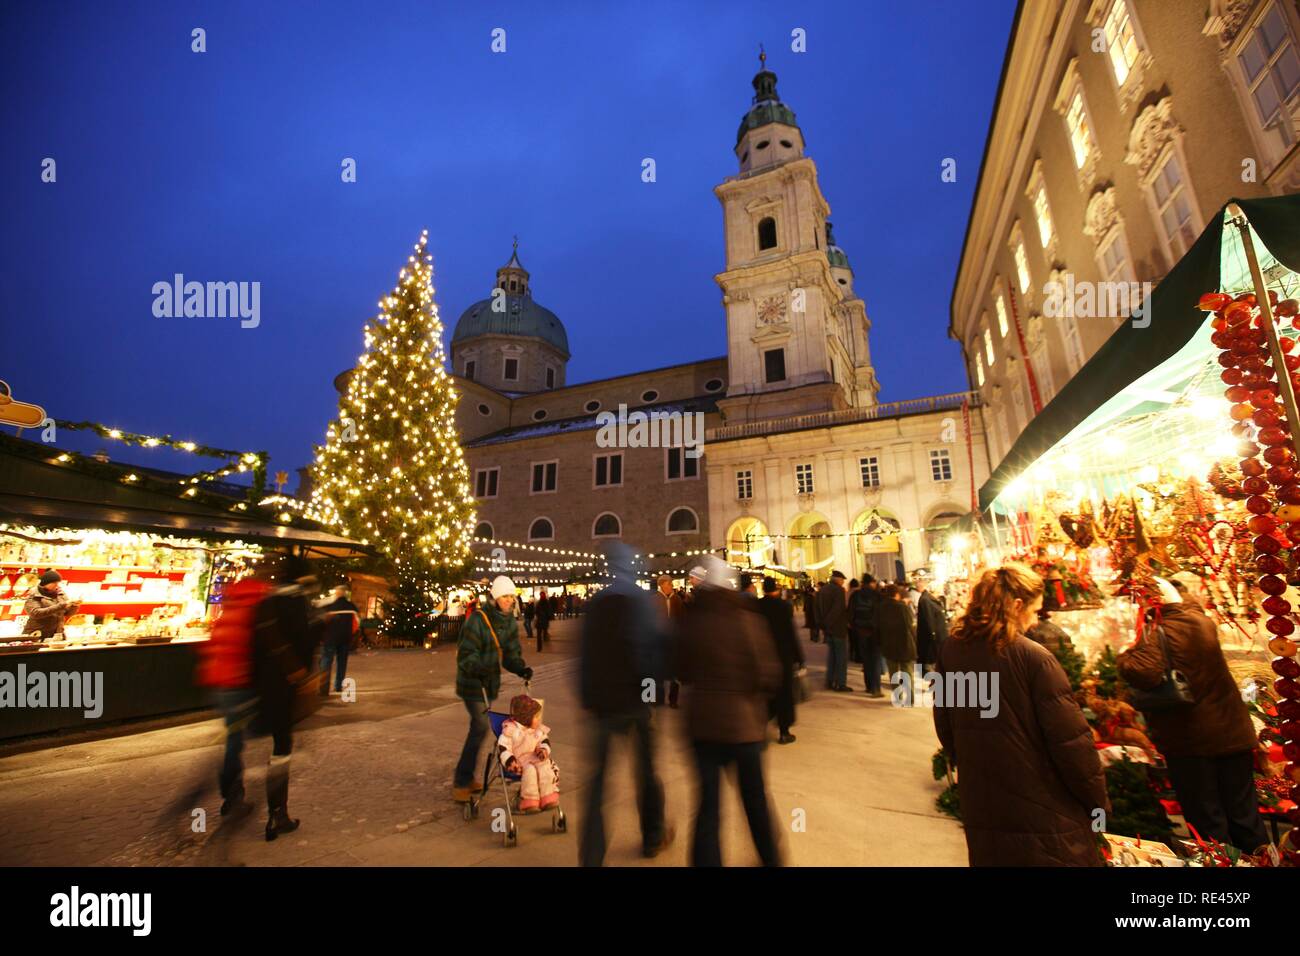 Christmas market at the Salzburger Dom cathedral, stalls in the Domplatz square, old town, Salzburg, Austria, Europe Stock Photo